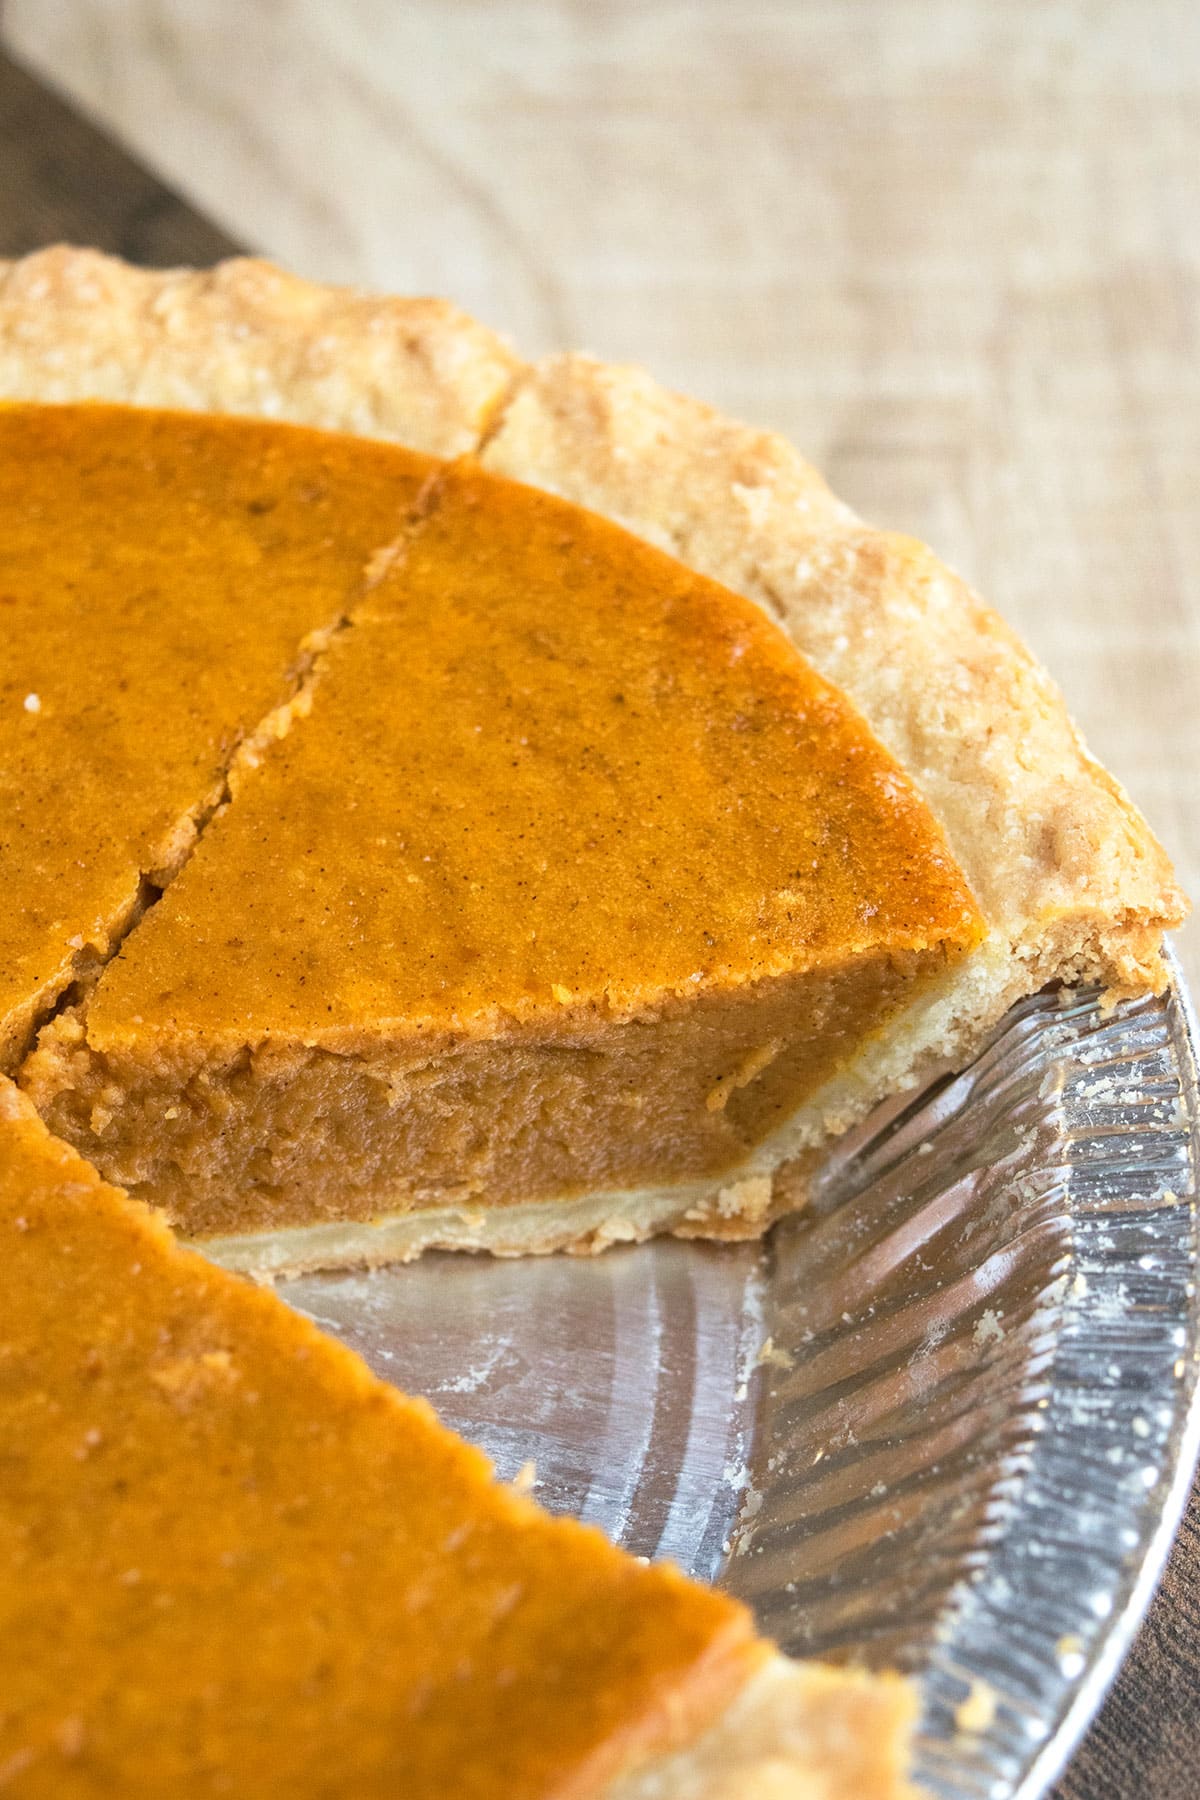 Classic Homemade Pumpkin Pie From Scratch With One Slice Removed in Foil Tray.